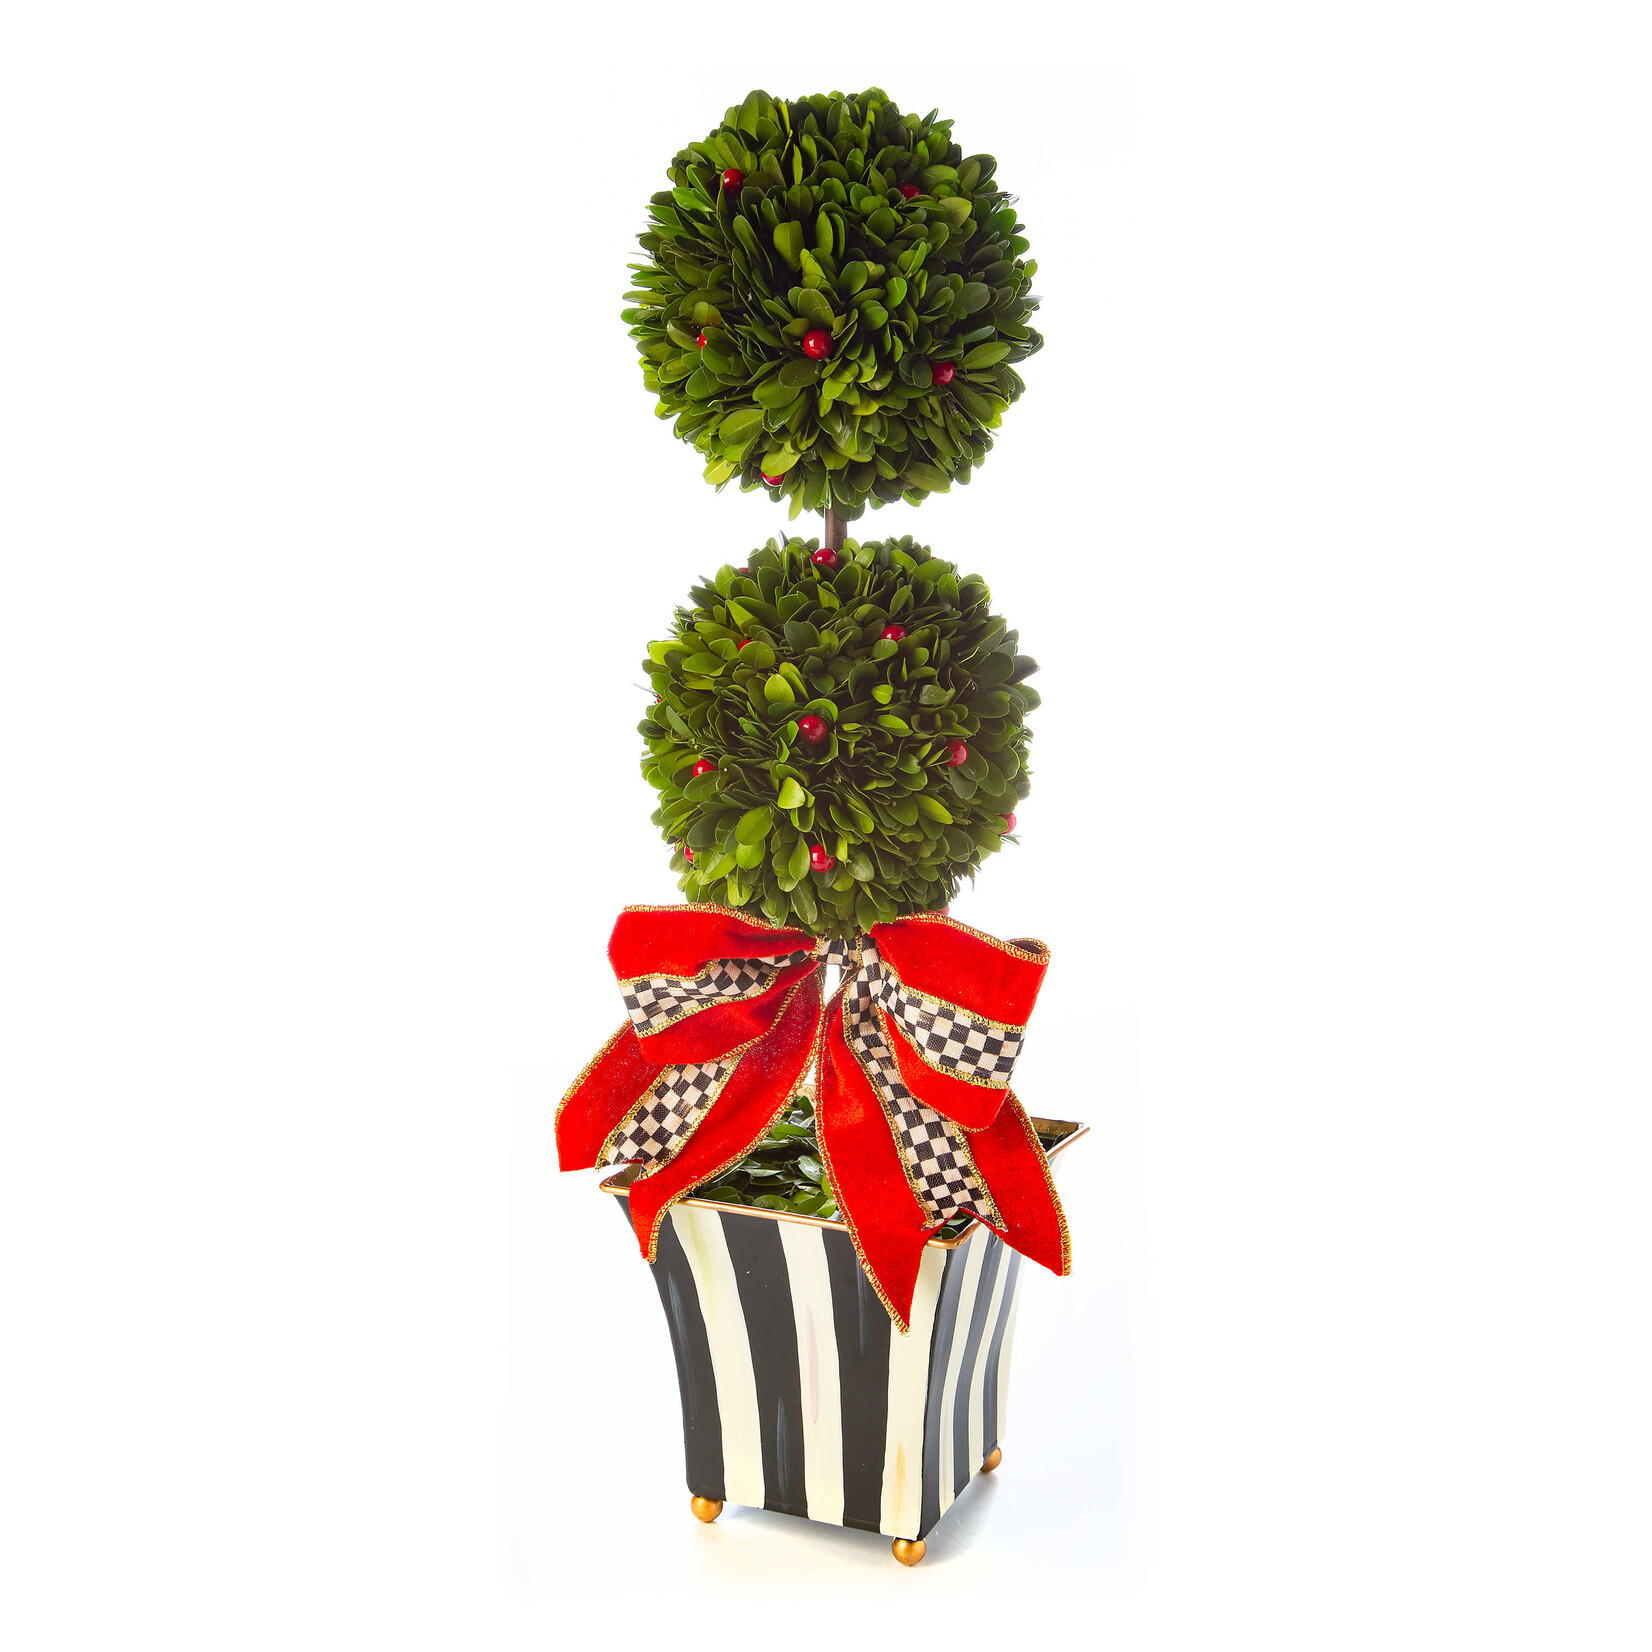 MacKenzie-Childs Classic Courtly Boxwood Topiary - Large